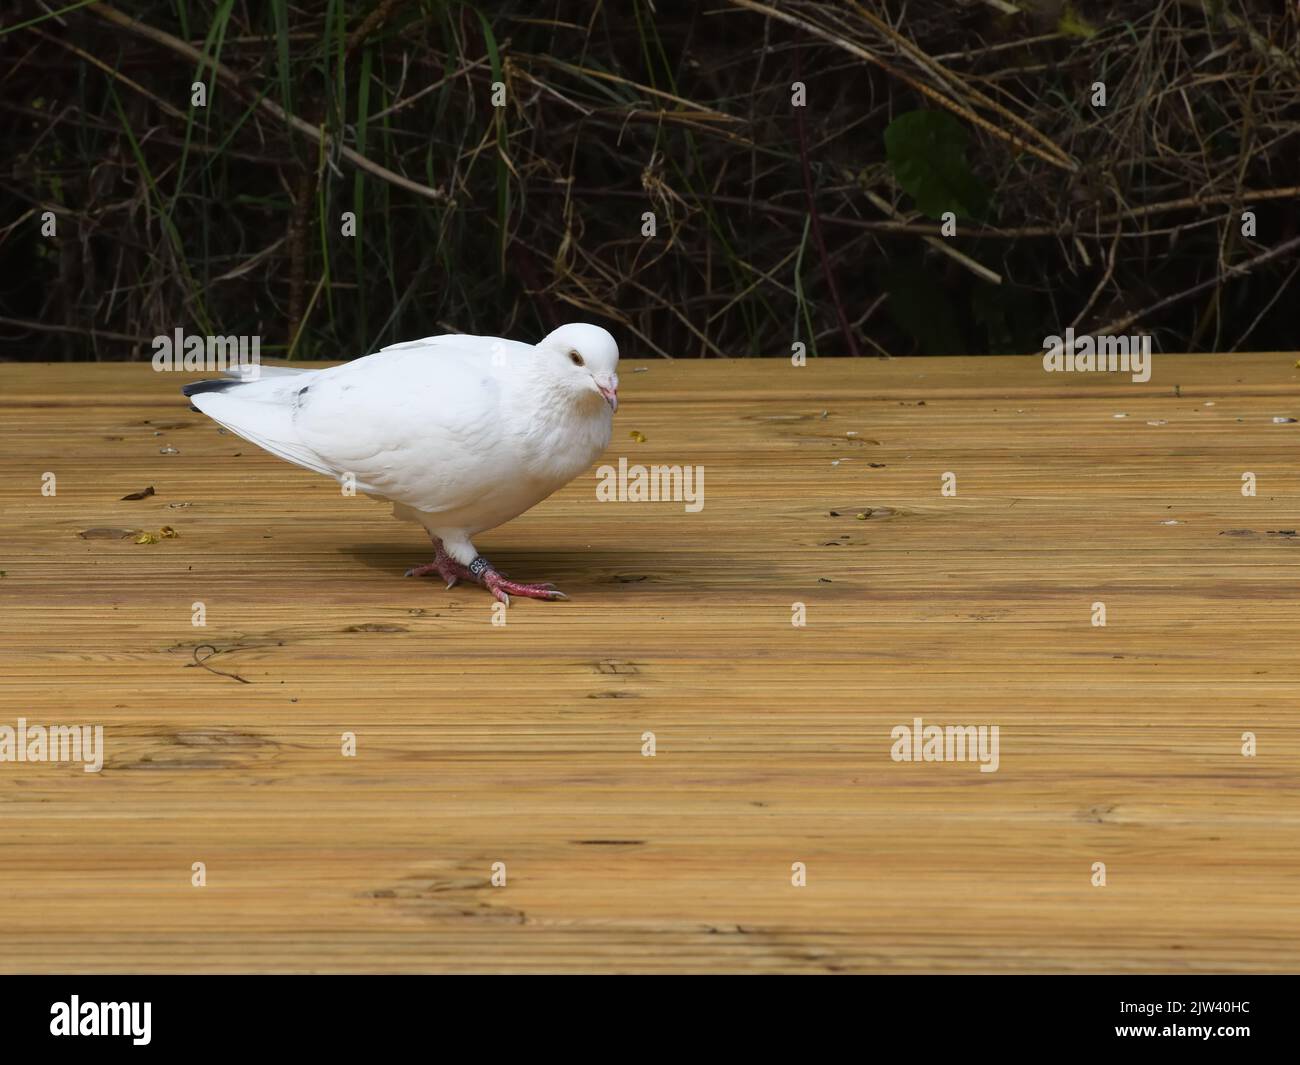 A white racing/homing pigeon lands exhausted in a domestic garden 5 miles from home. Stock Photo